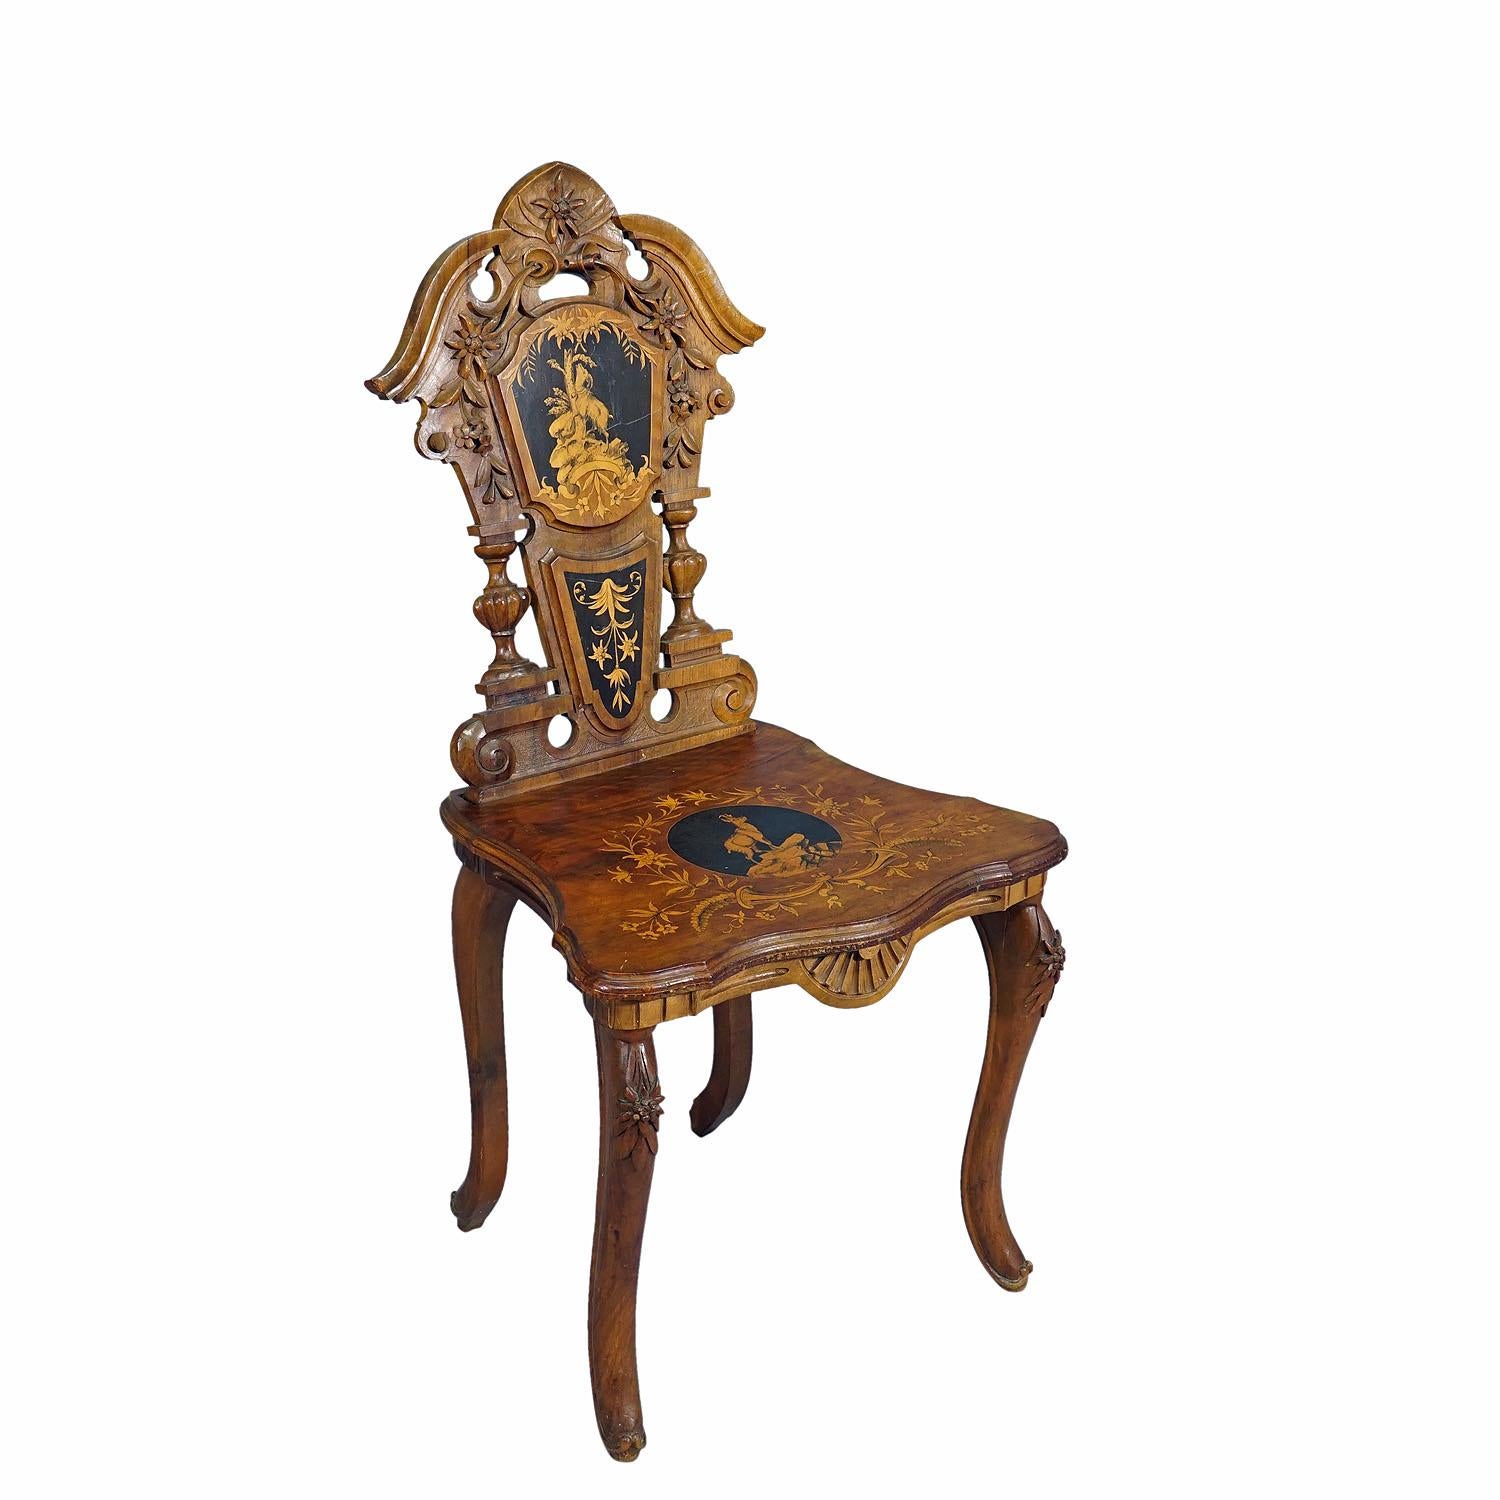 Nutwood Edelweis Marquetry Chair Swiss Brienz 1900

A wonderful inlayed nutwood chair decorated with inlayed and painted sceneries depicting chamois, goat and edelweis flowers. Surrounded by ebony and lindenwood marquetry. Manufactured ca. 1900 in